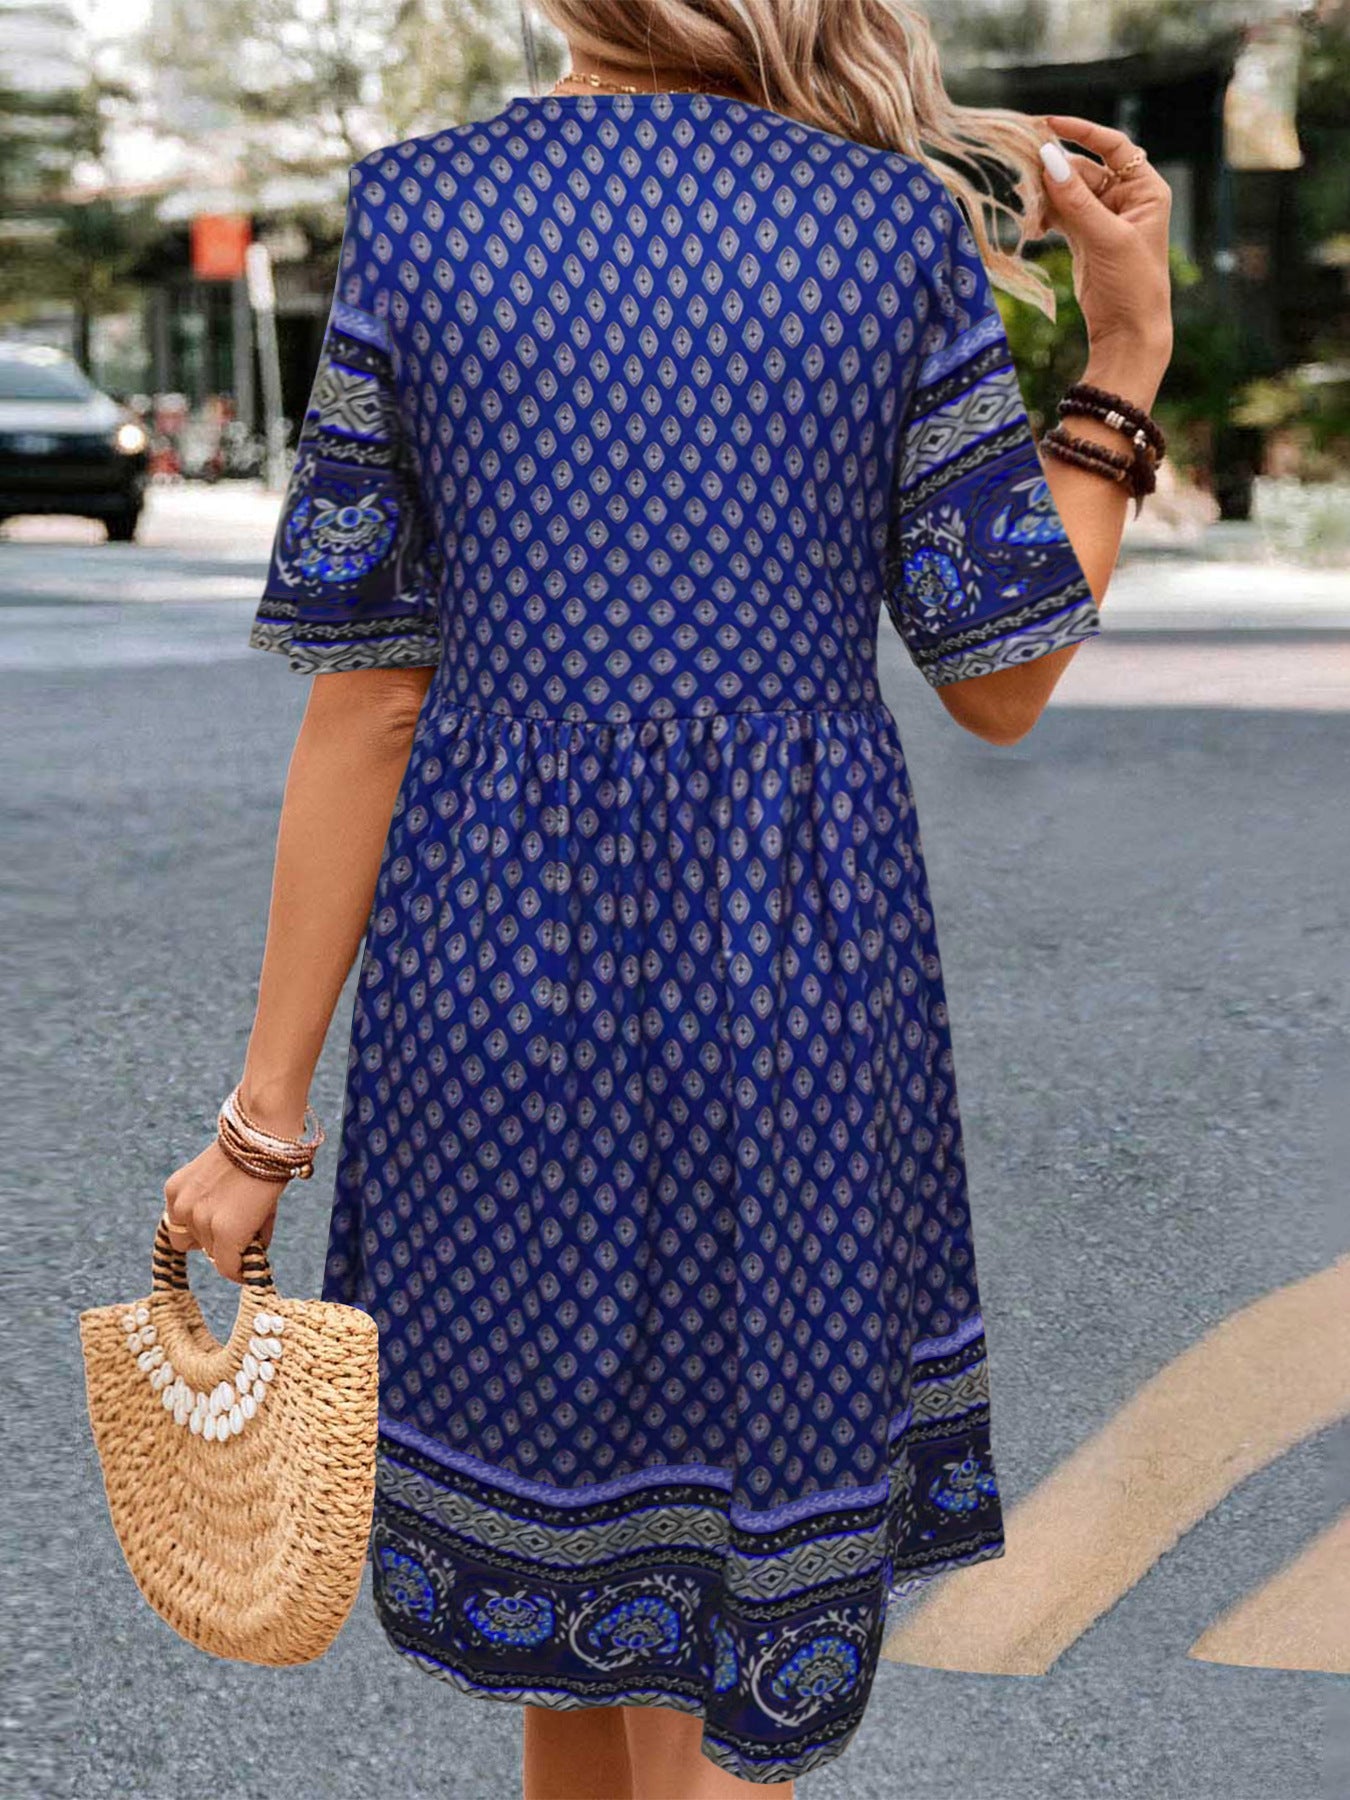 Women's Short-sleeved Printed Ethnic Fashion Casual Dress Dresses